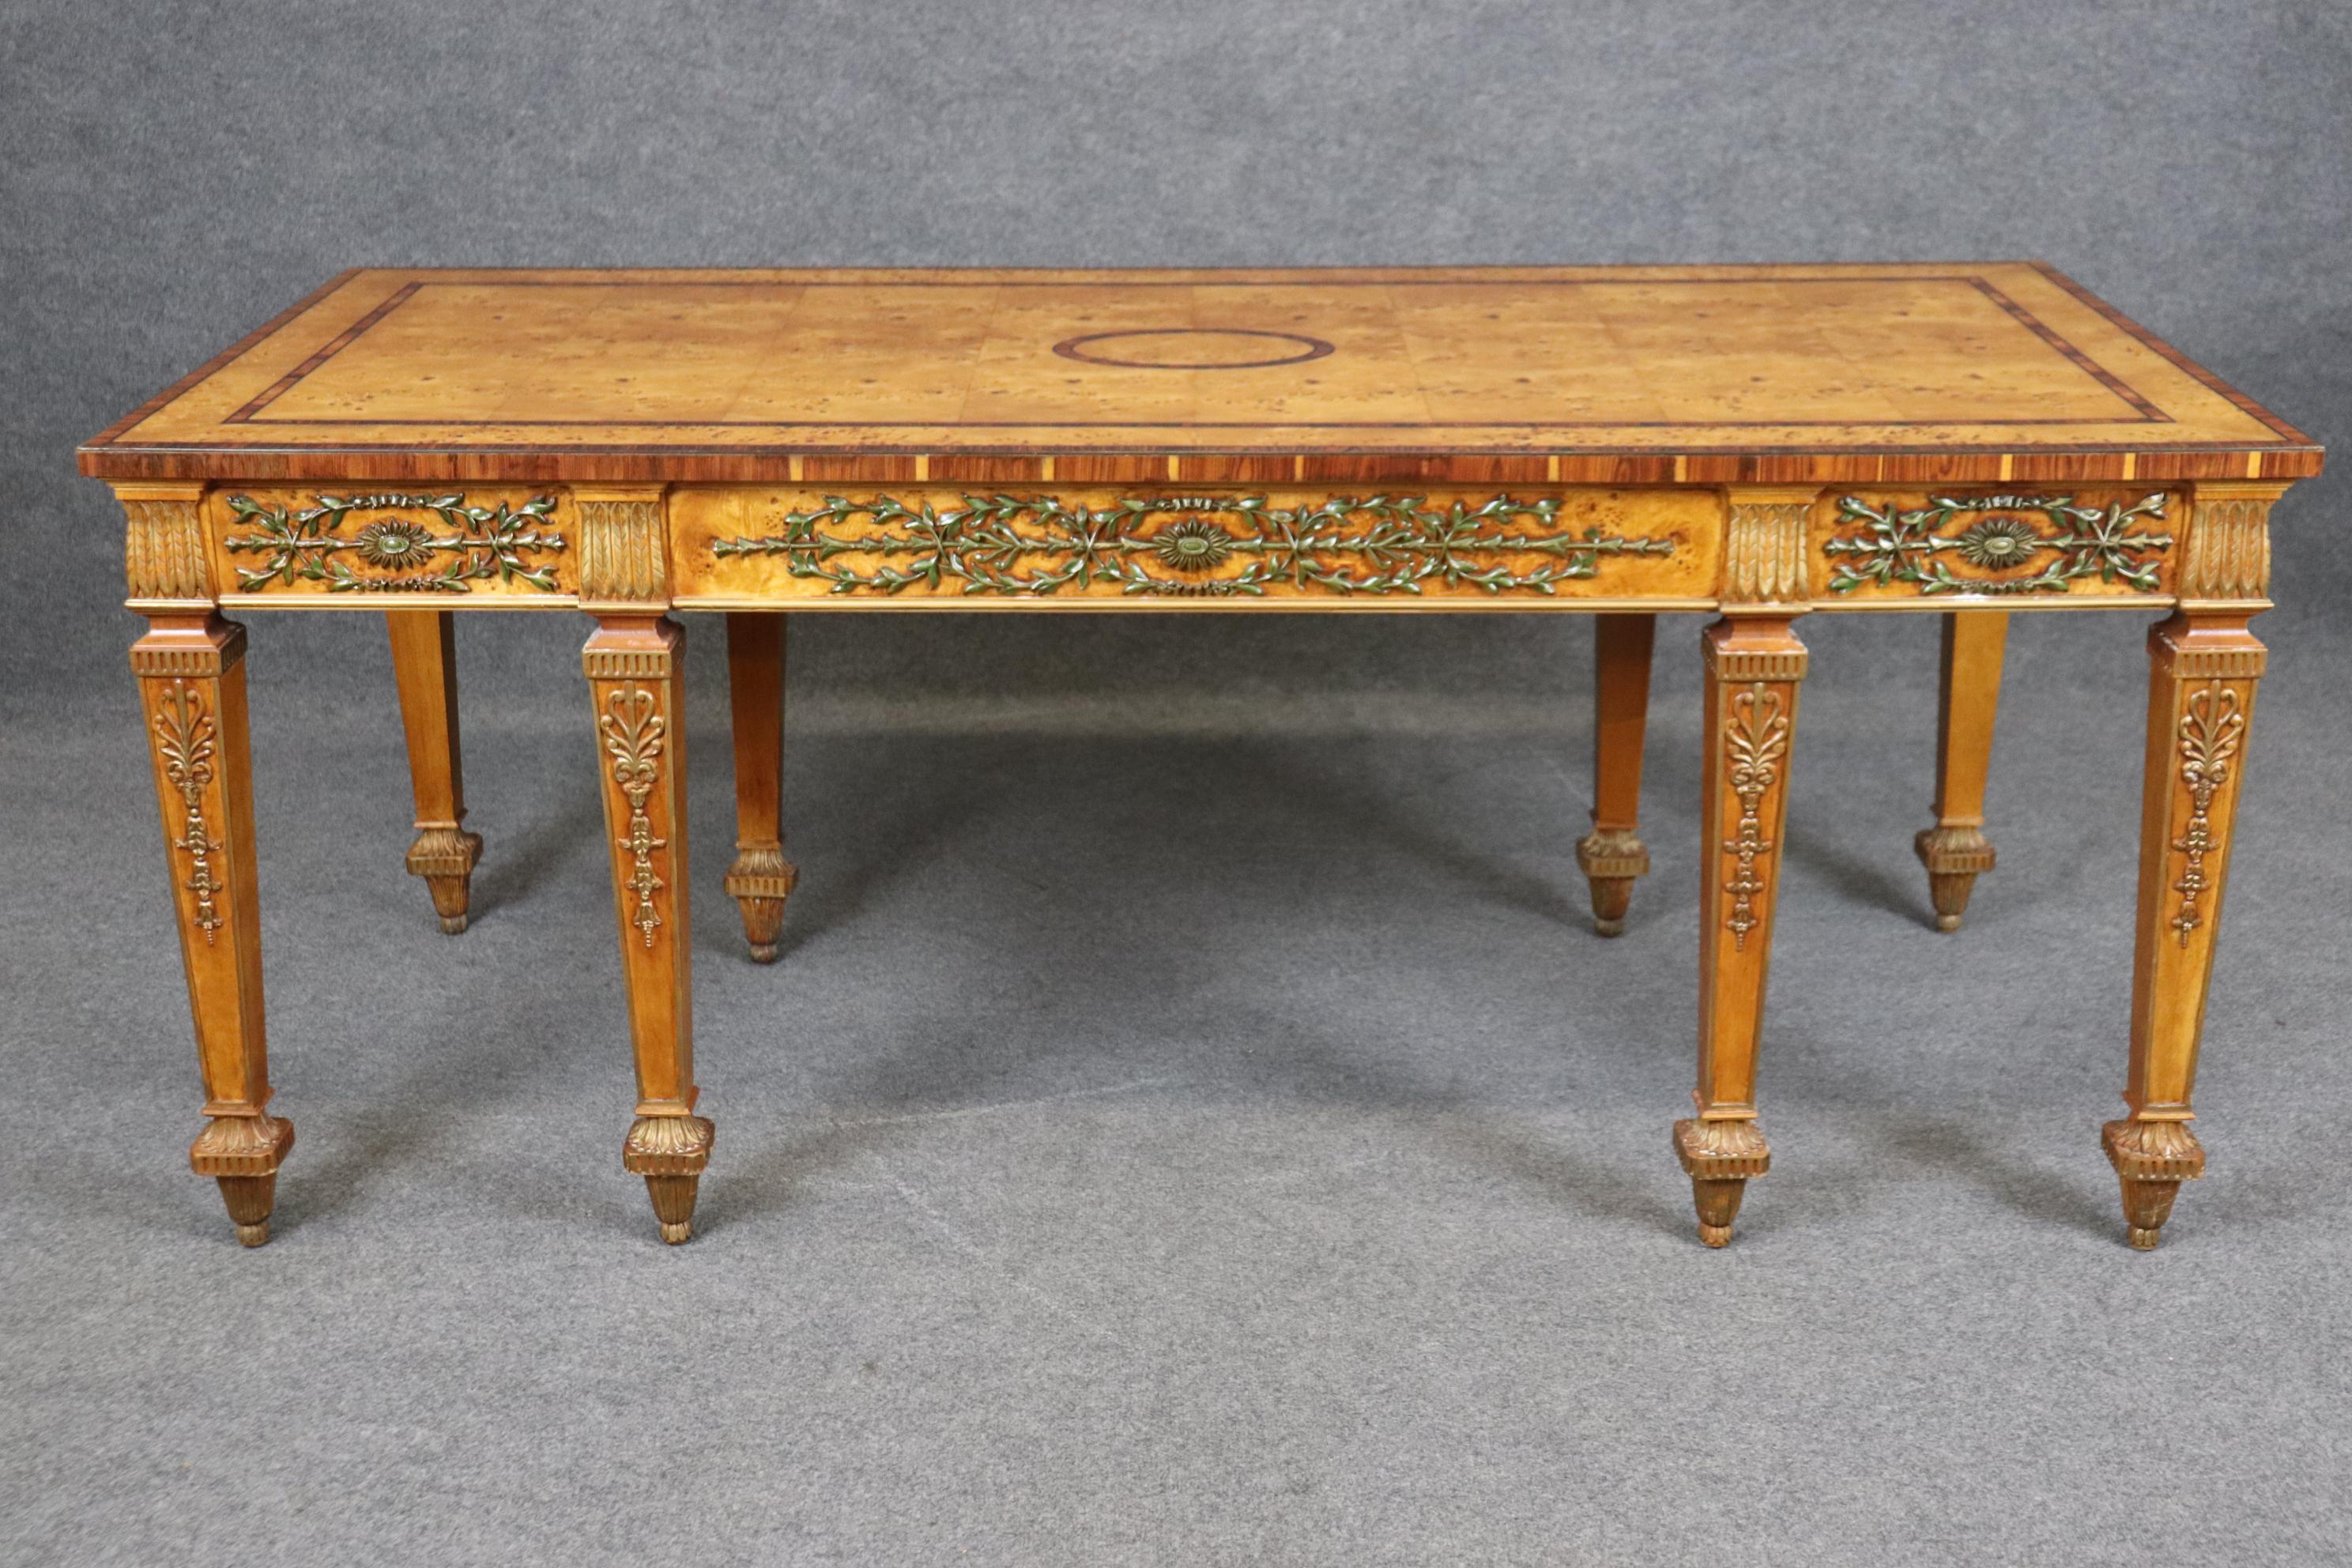 Contemporary Henredon Grand Provenance English Adams Style Decorated Carved Writing Desk 